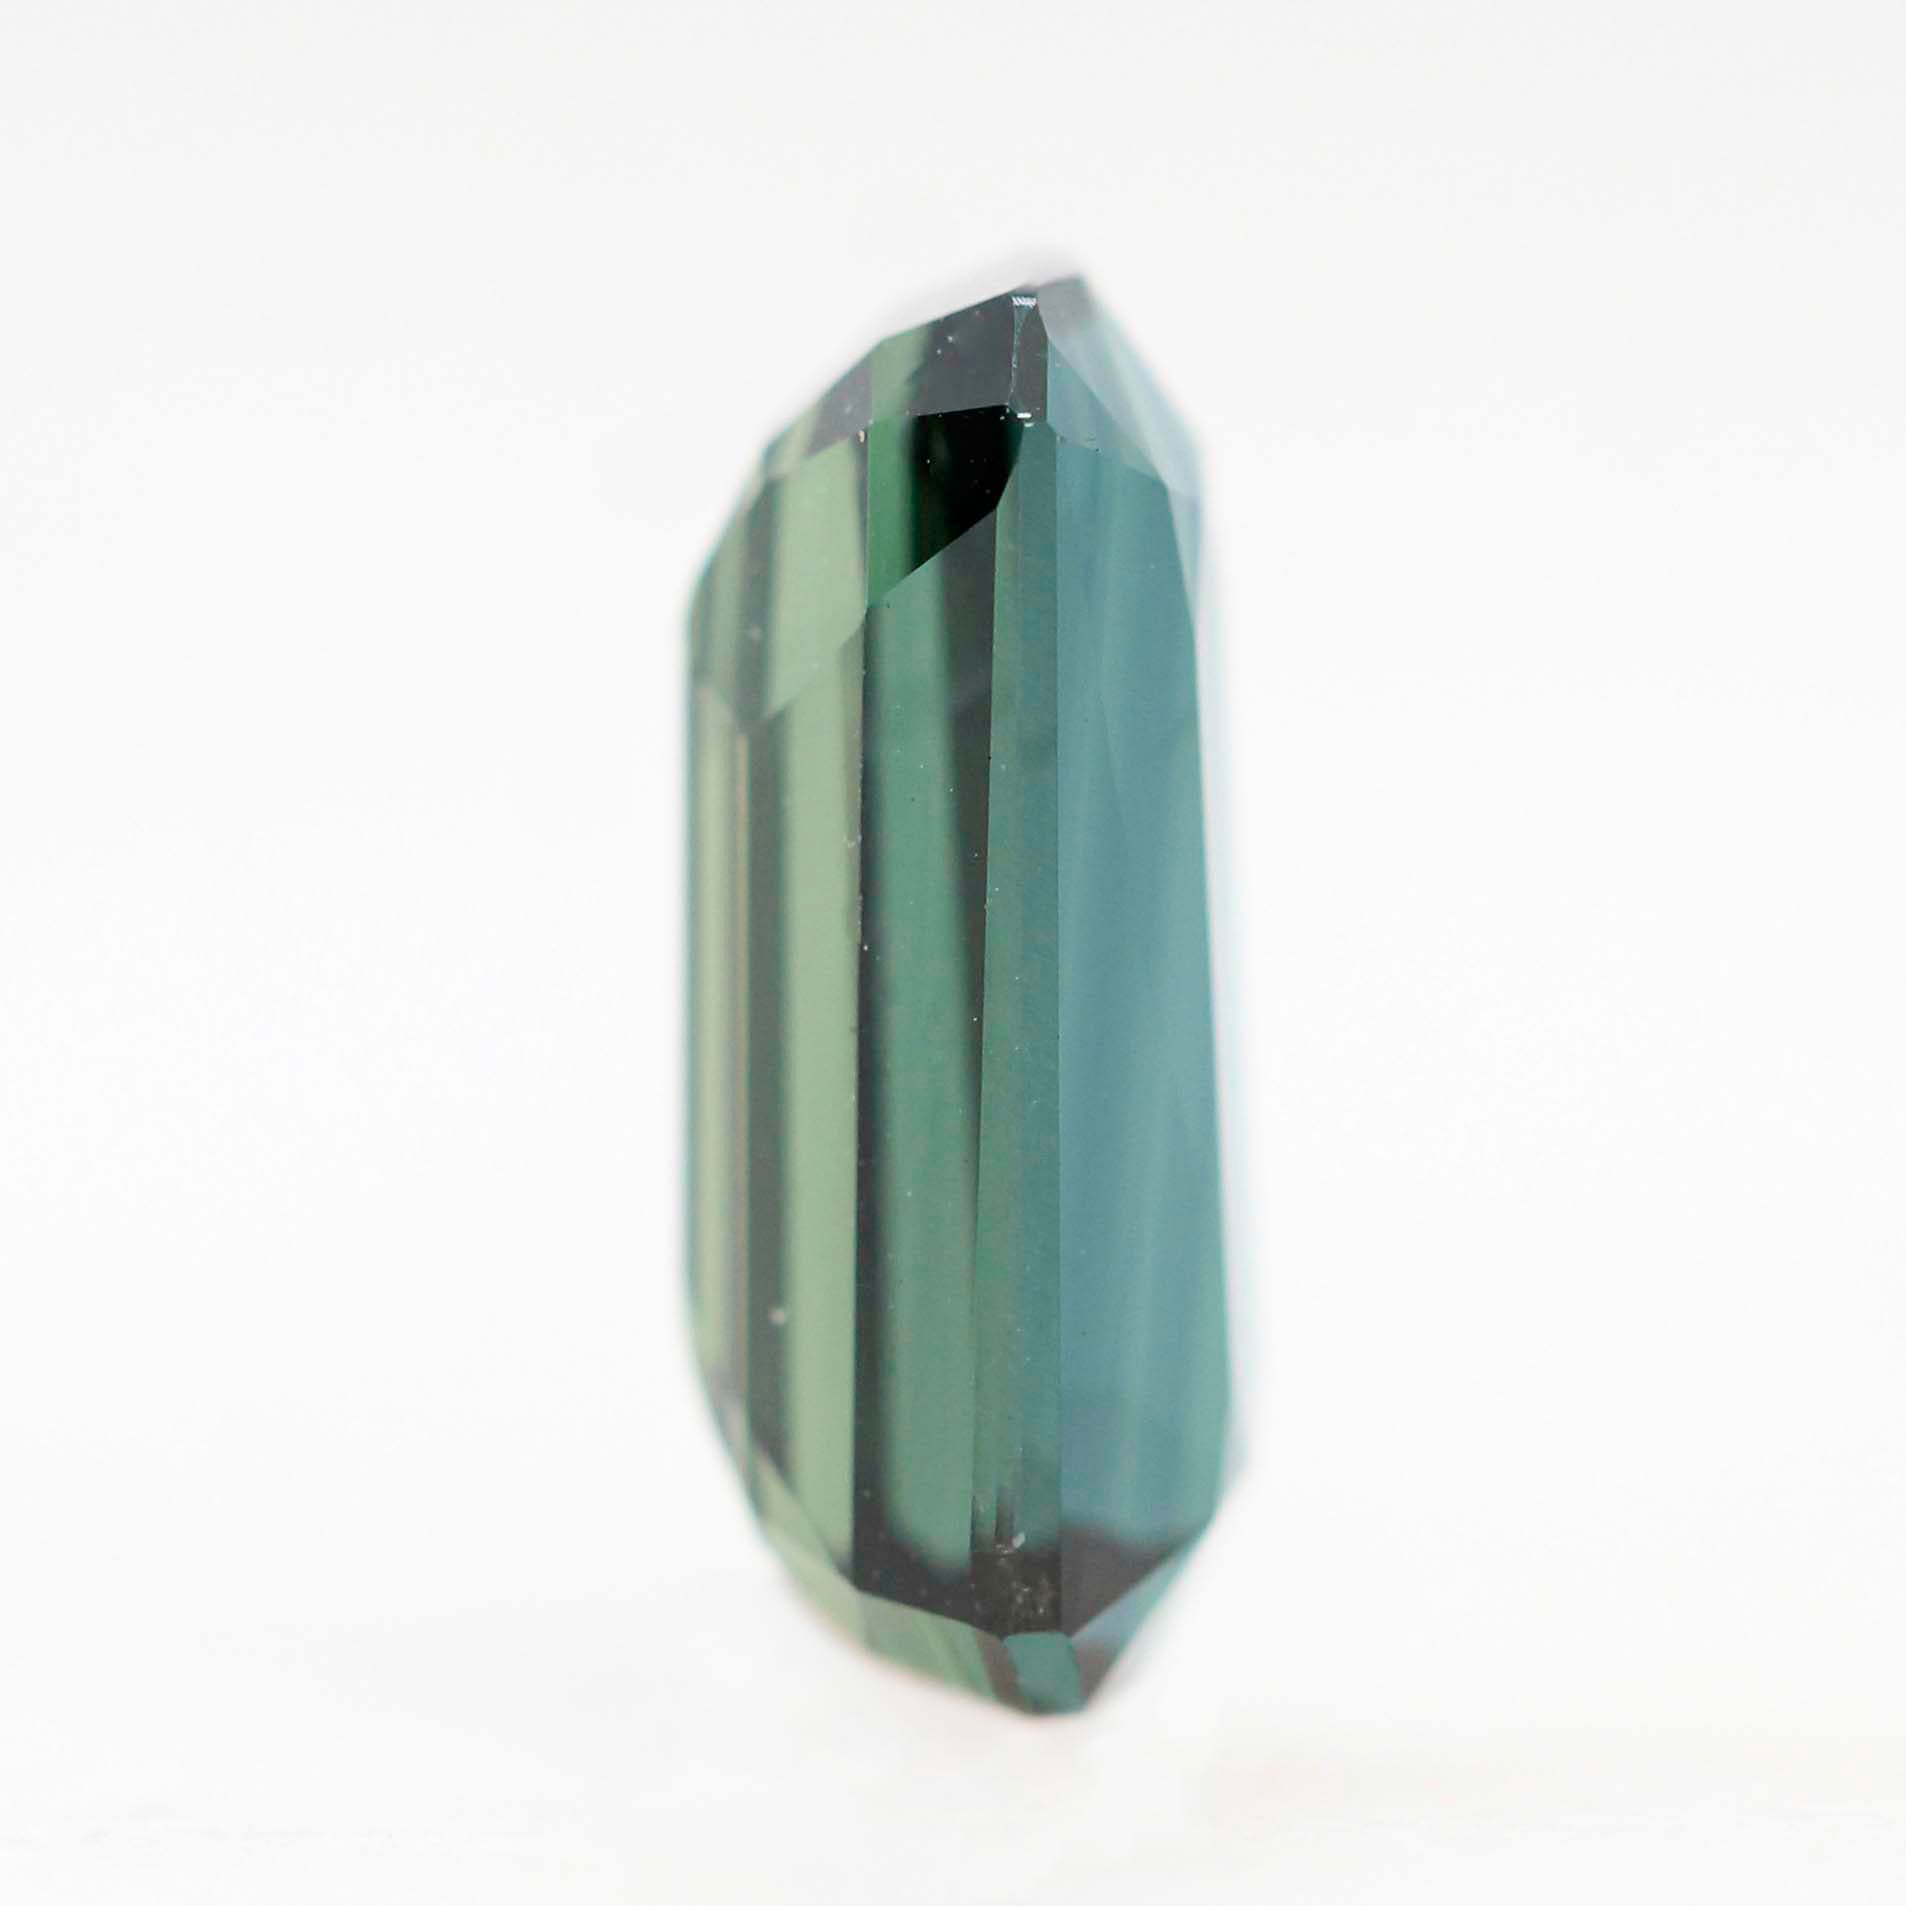 3.39 Carat Teal Elongated Emerald Cut Sapphire for Custom Work - Inventory Code TAS339 - Midwinter Co. Alternative Bridal Rings and Modern Fine Jewelry